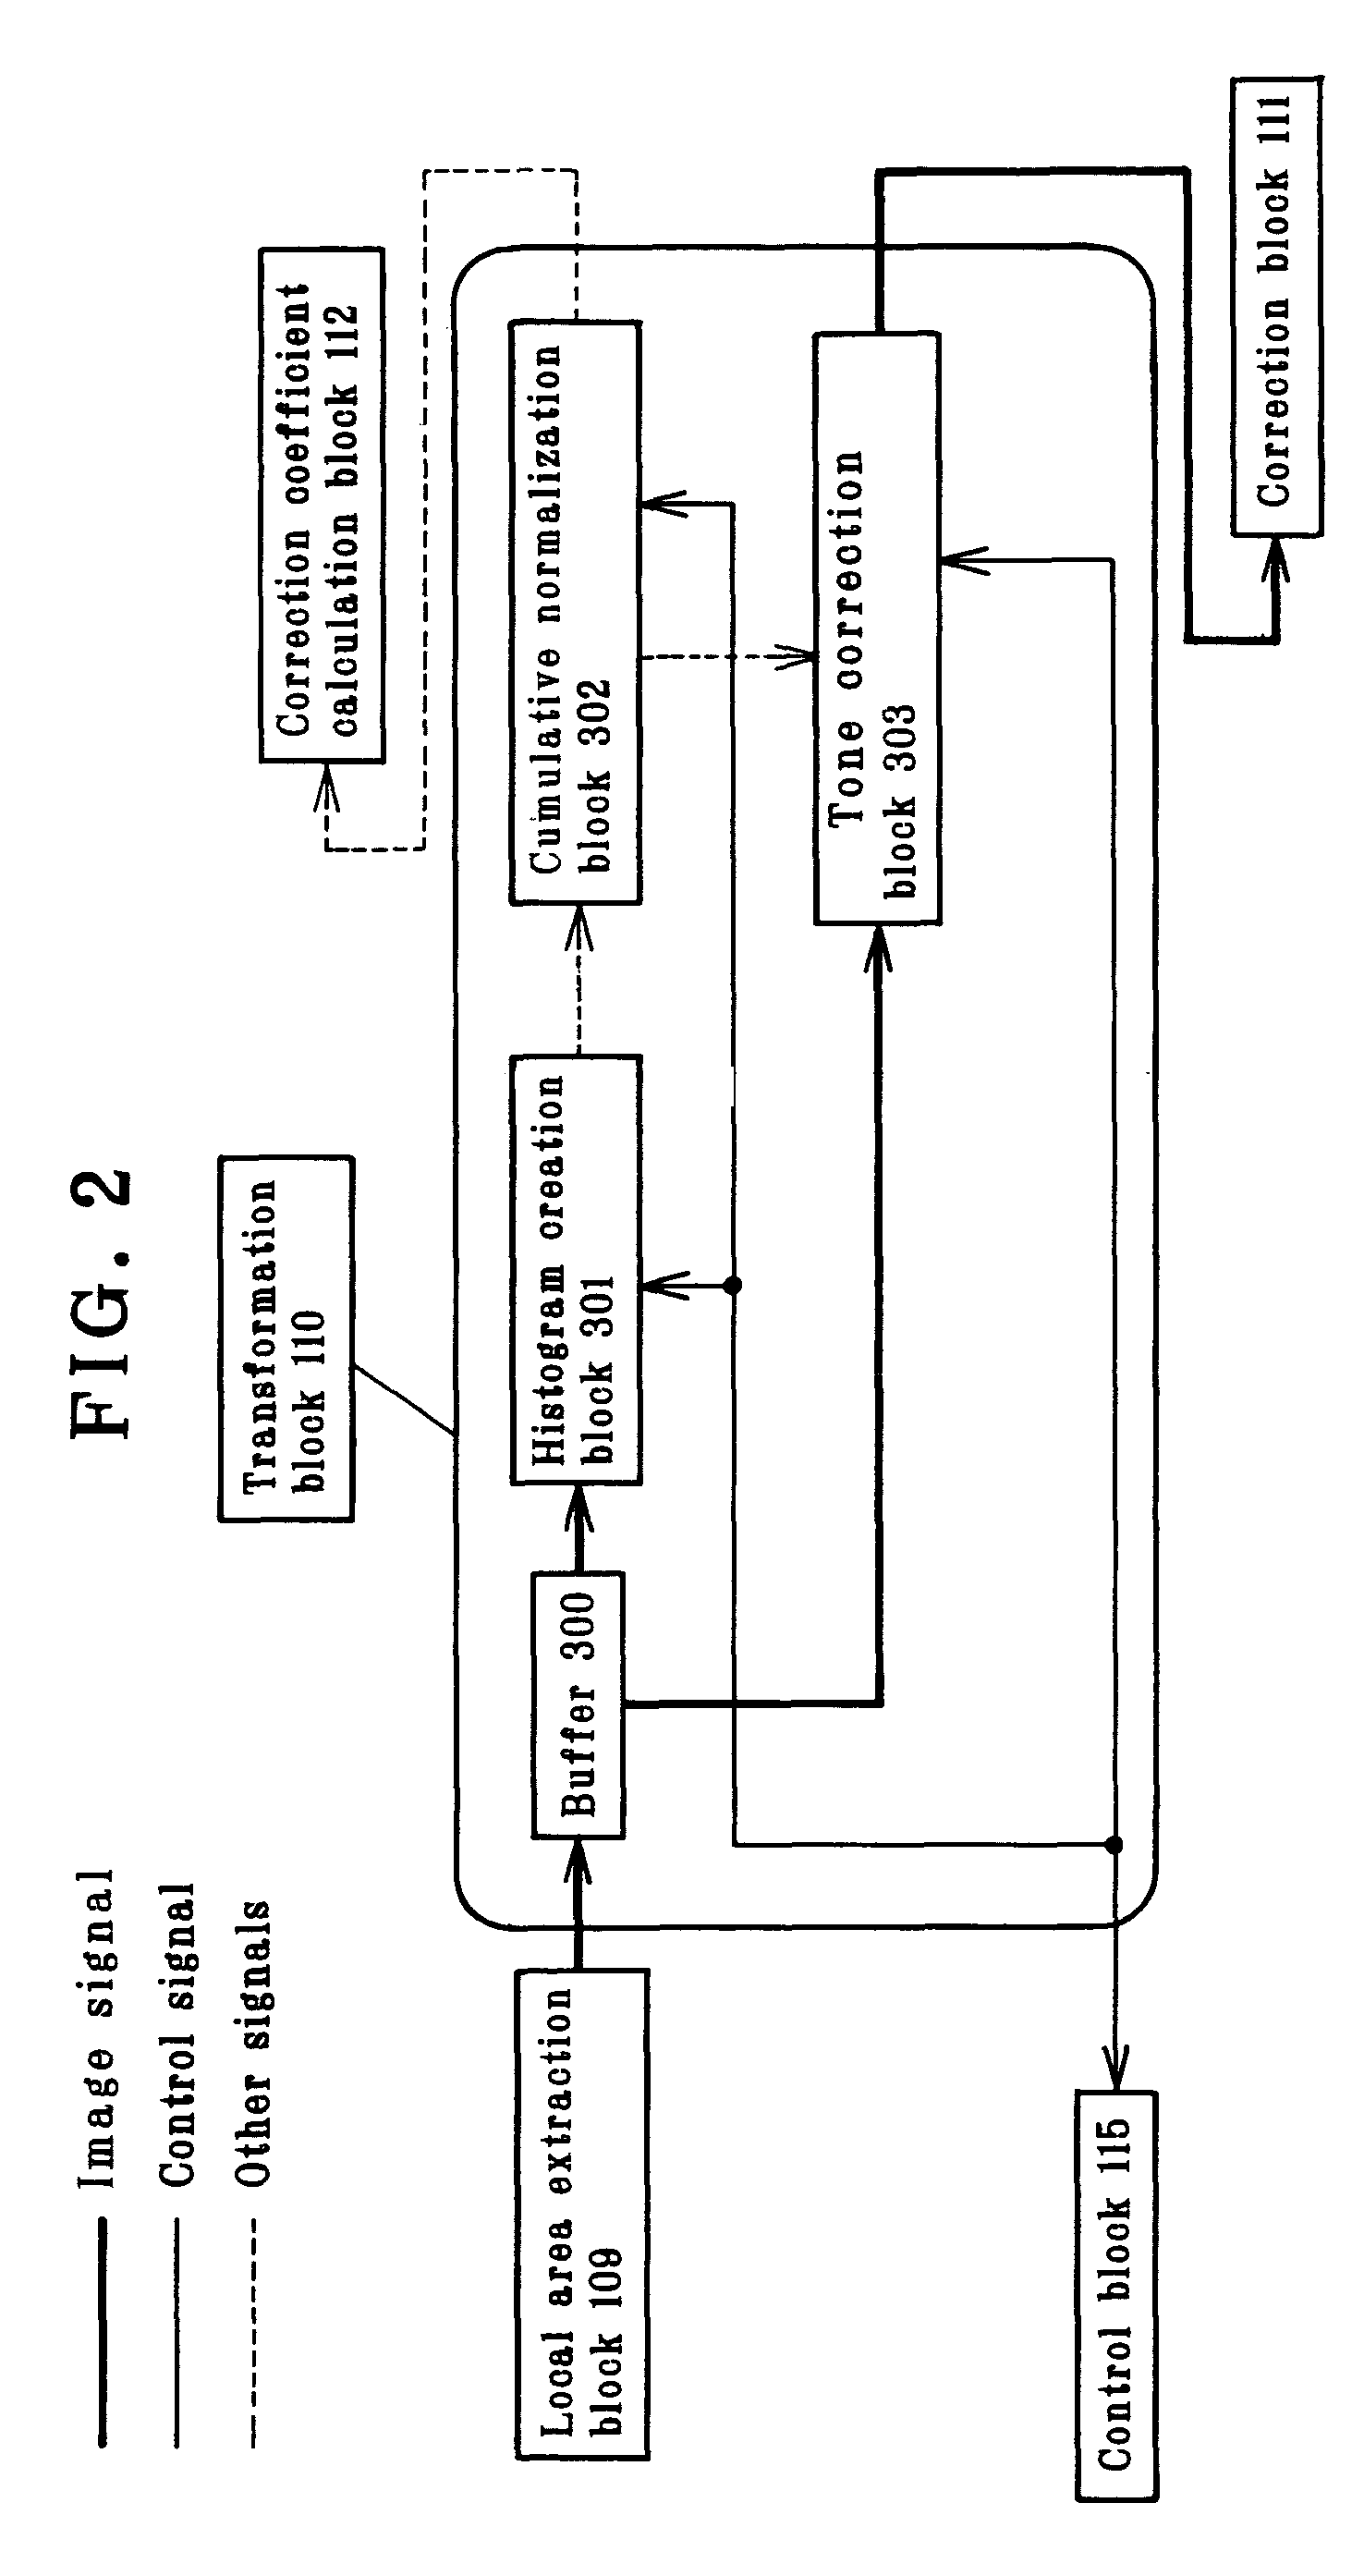 Image processing apparatus which calculates a correction coefficient with respect to a pixel of interest and uses the correction coefficient to apply tone correction to the pixel of interest